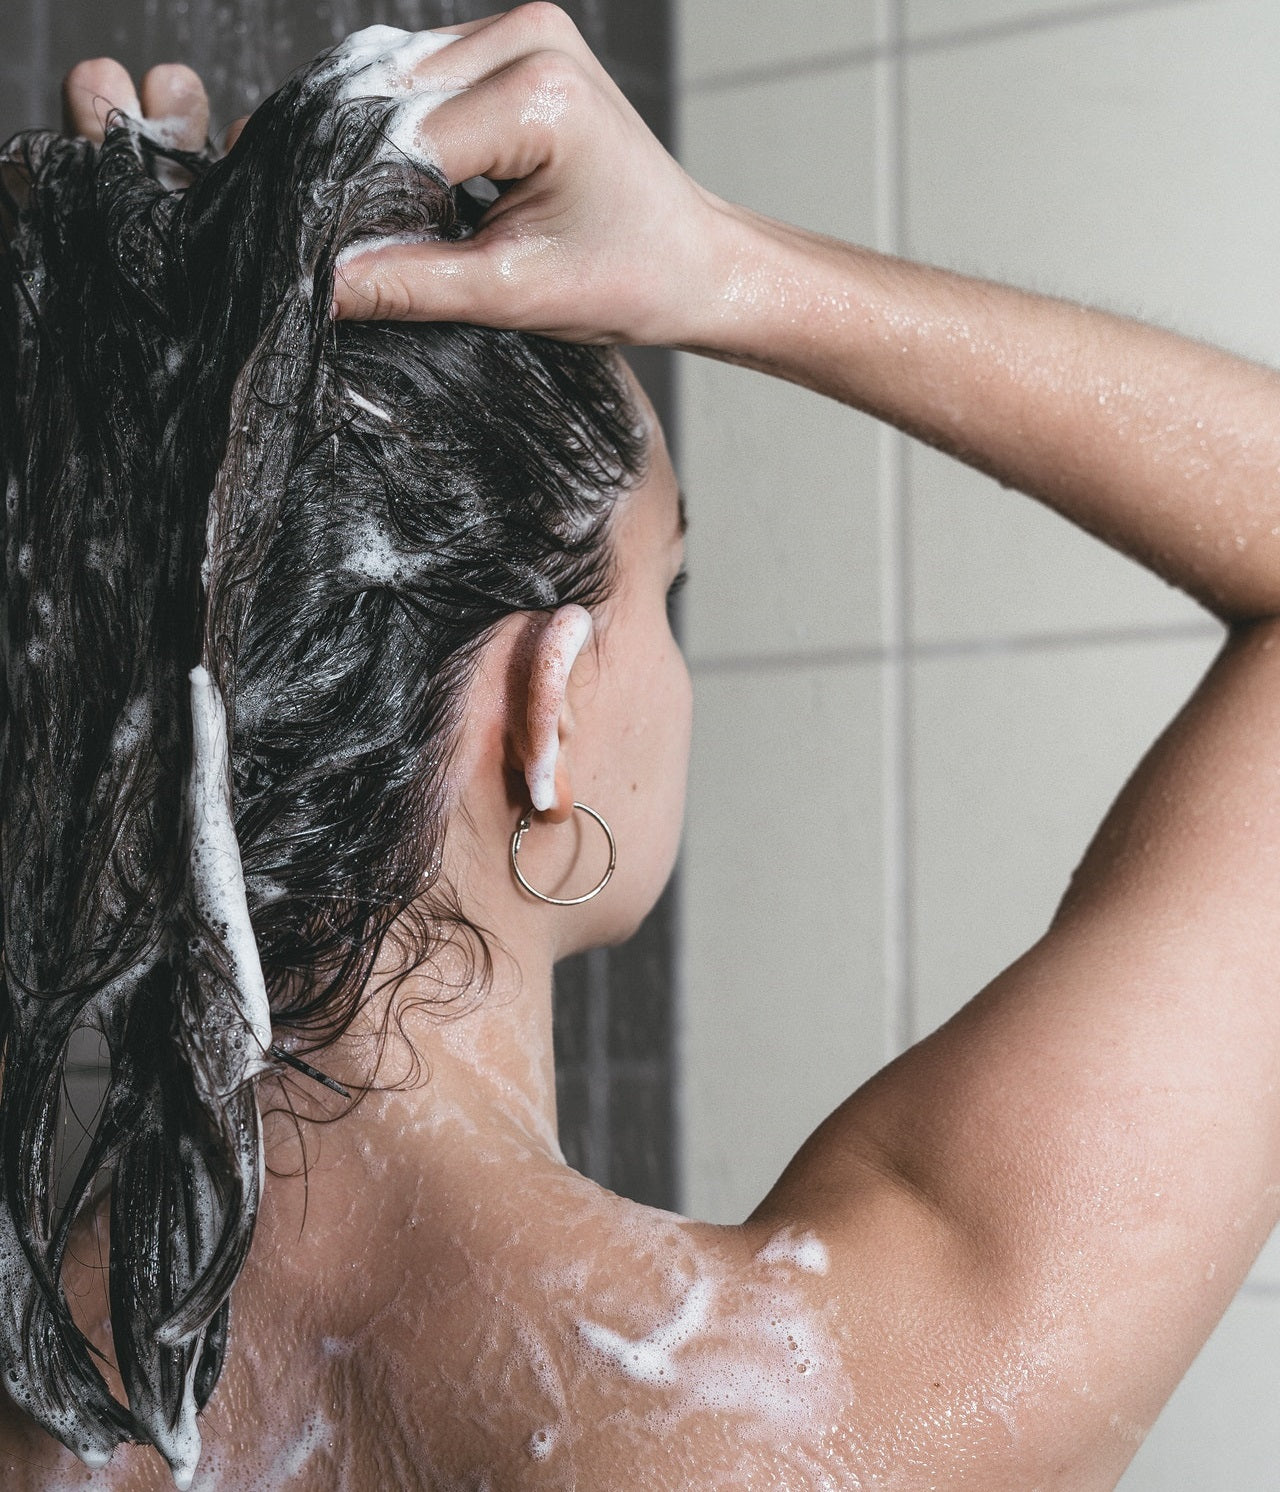 Shampoo & Conditioner: What, Why & How Often